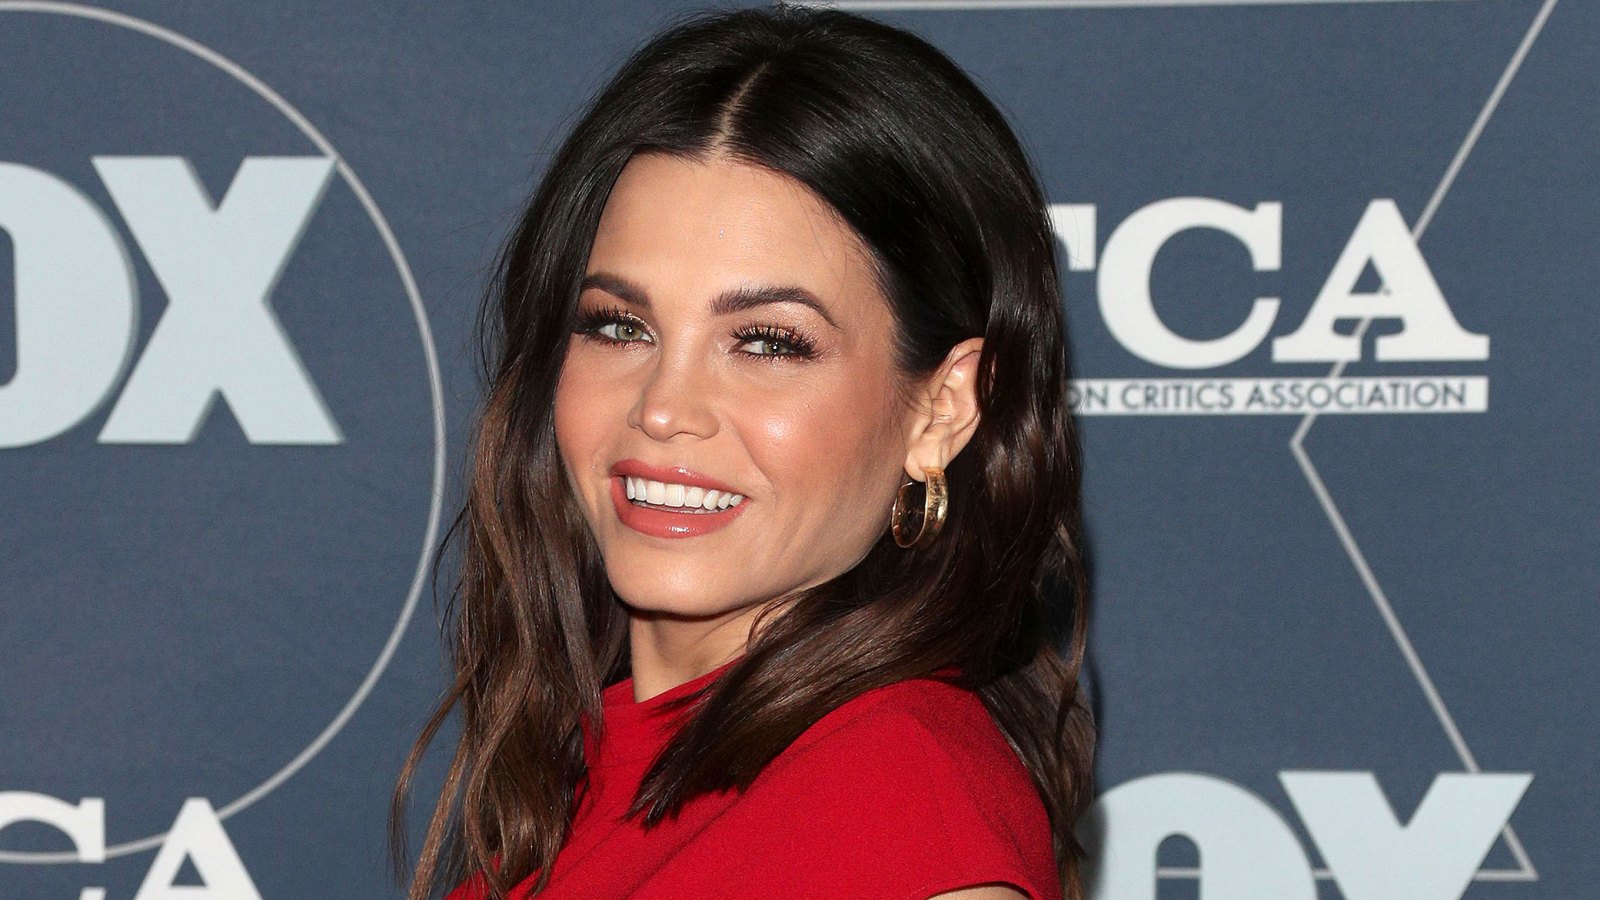 Pregnant Jenna Dewan Shows Off Her Bare Baby Bump in a Sheet Mask